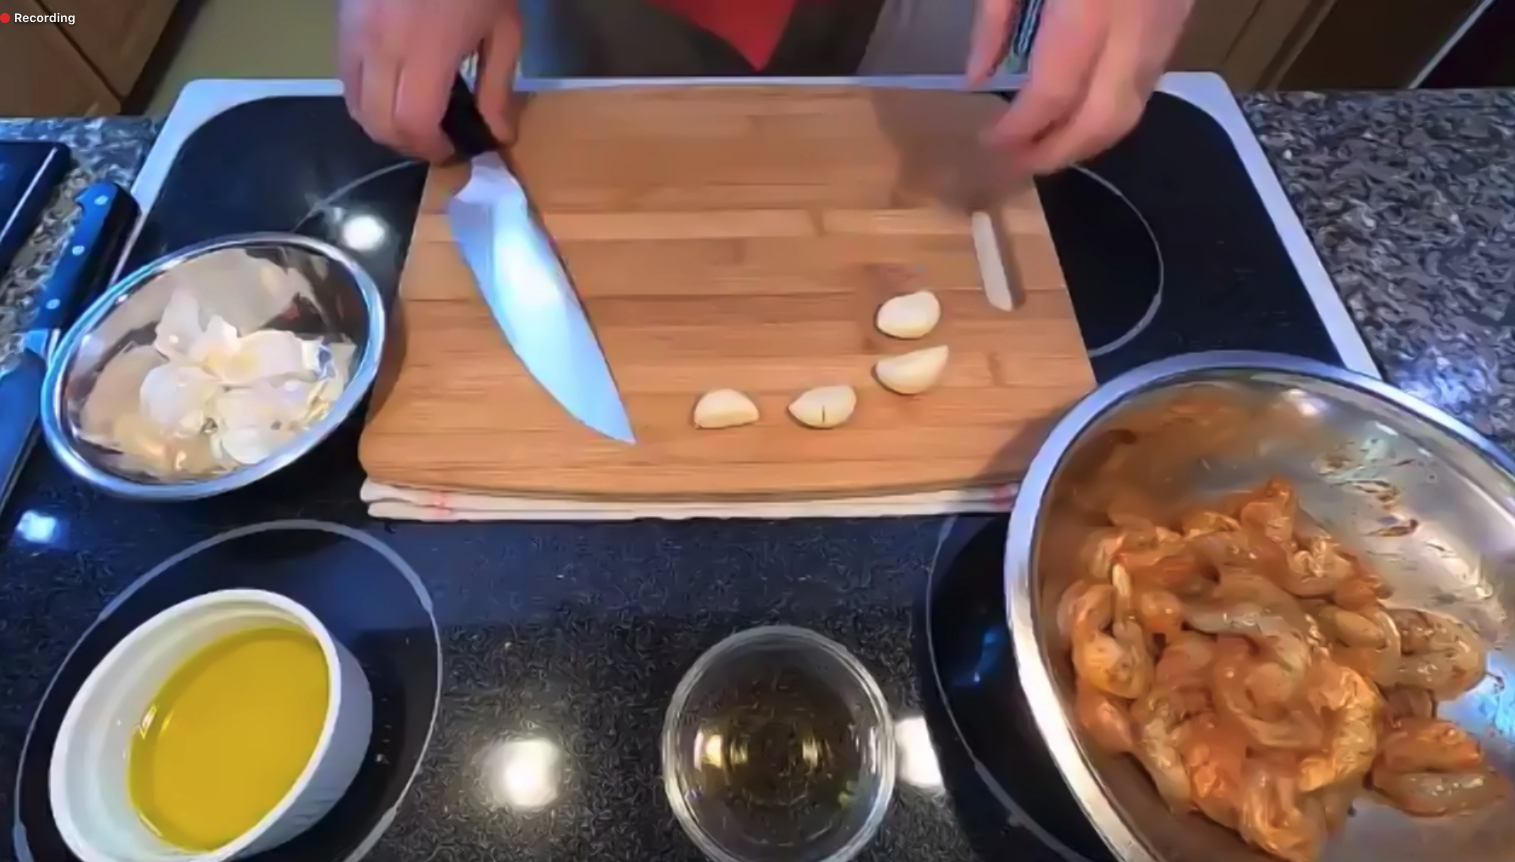 Staff hosts a cooking demo, cutting board with ingredients